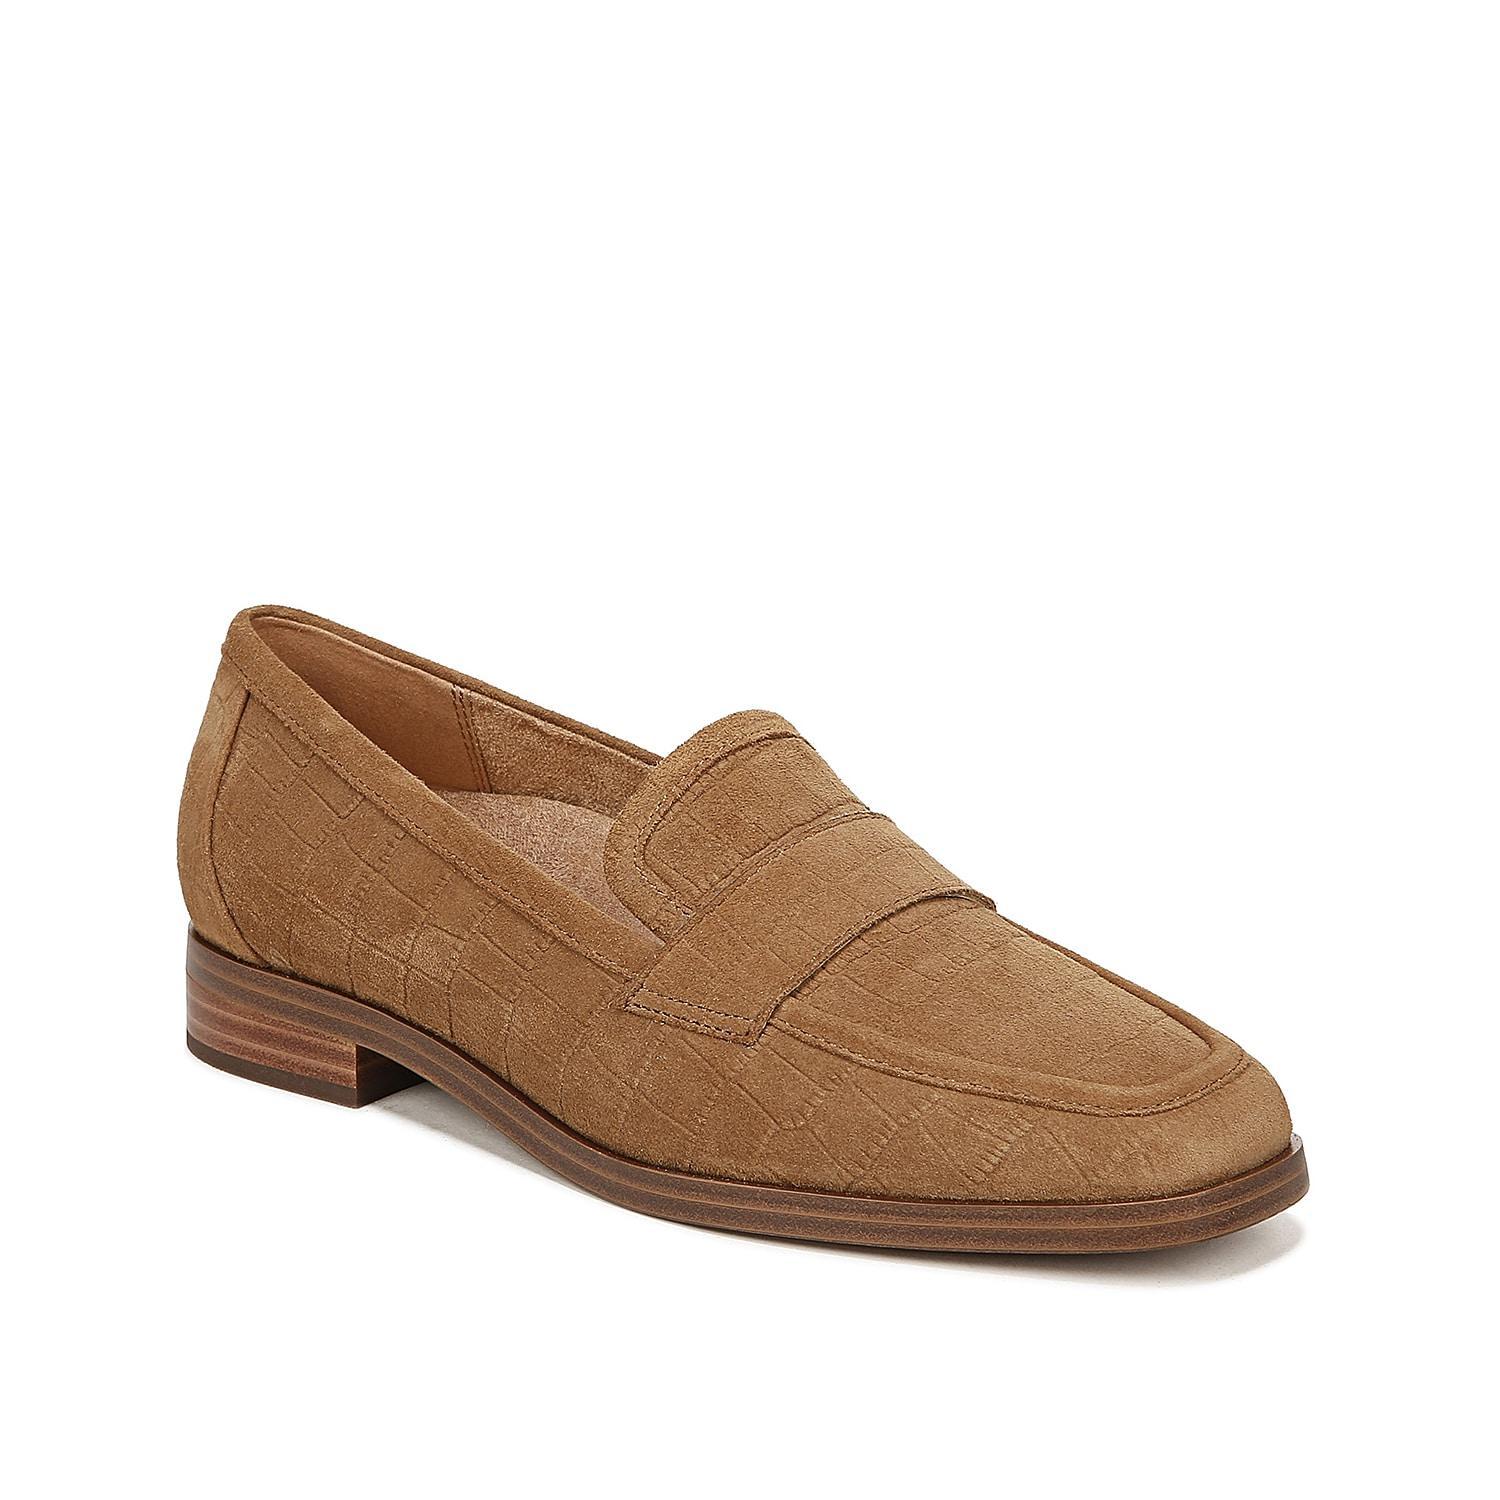 Vionic Sellah Croc Embossed Loafer Product Image